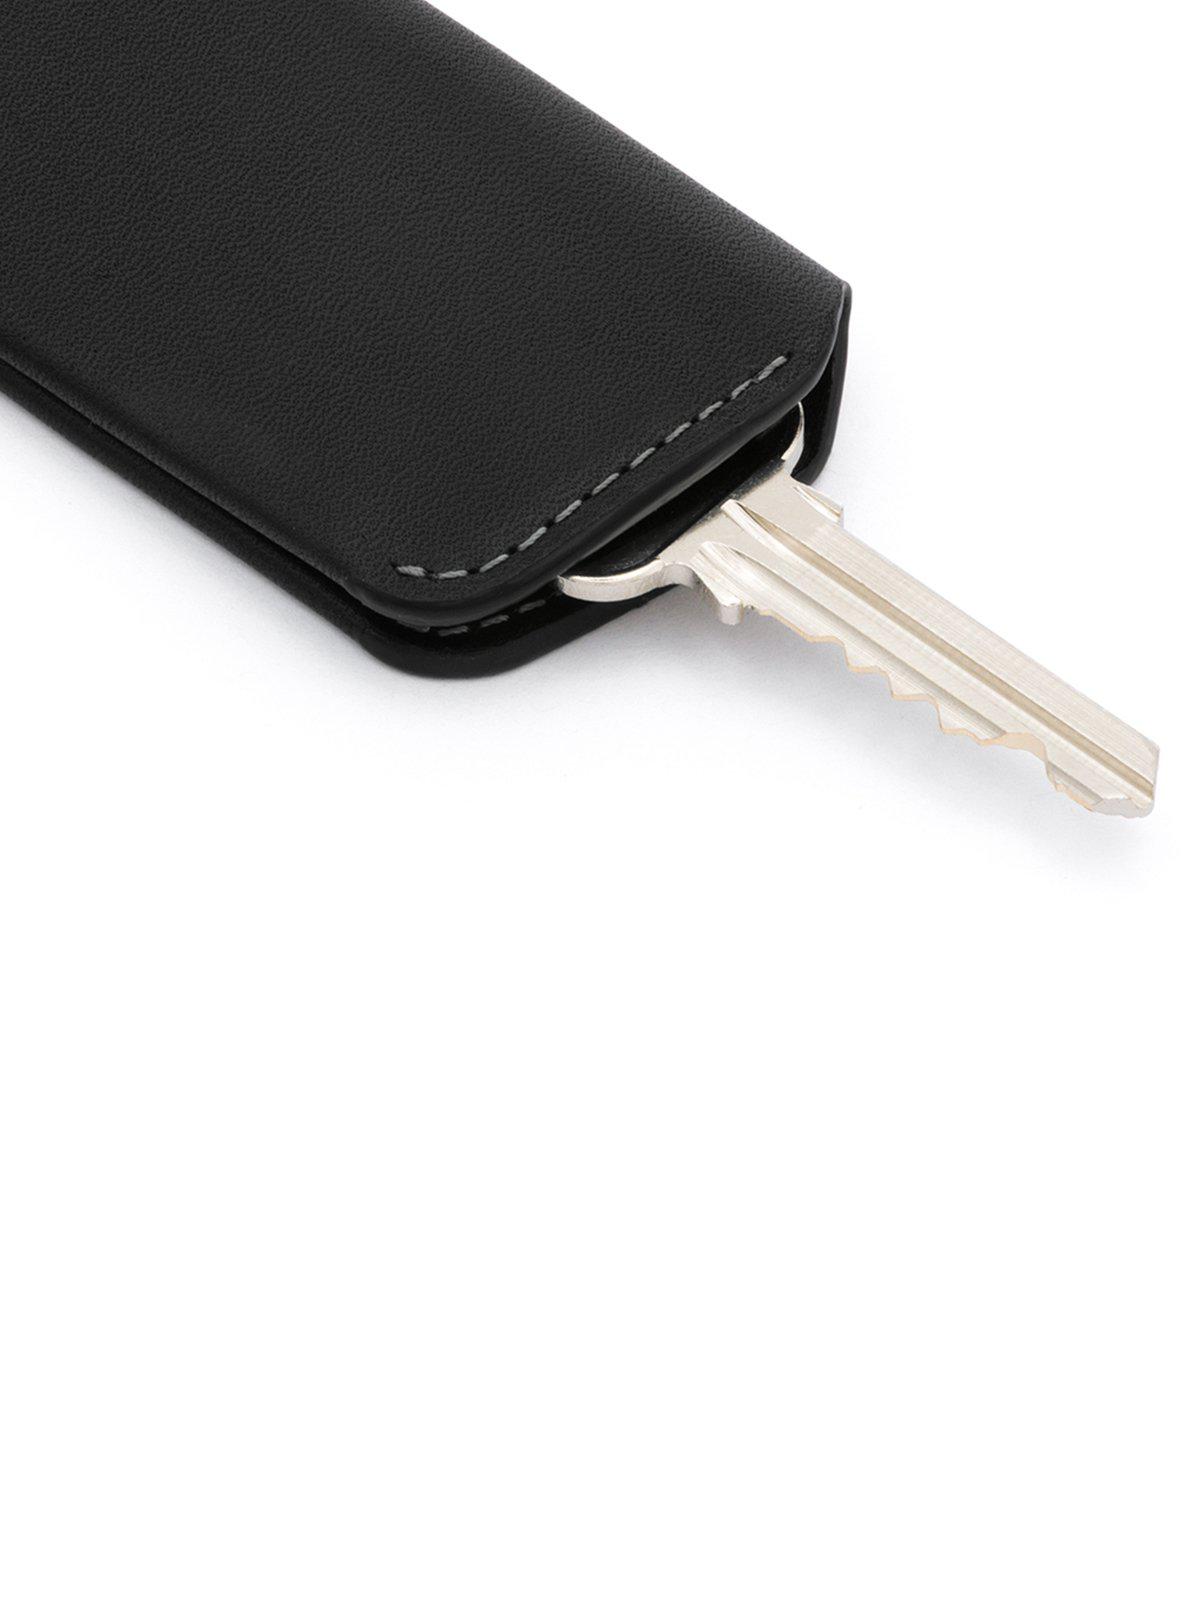 Bellroy Key Cover Plus Black - MORE by Morello Indonesia